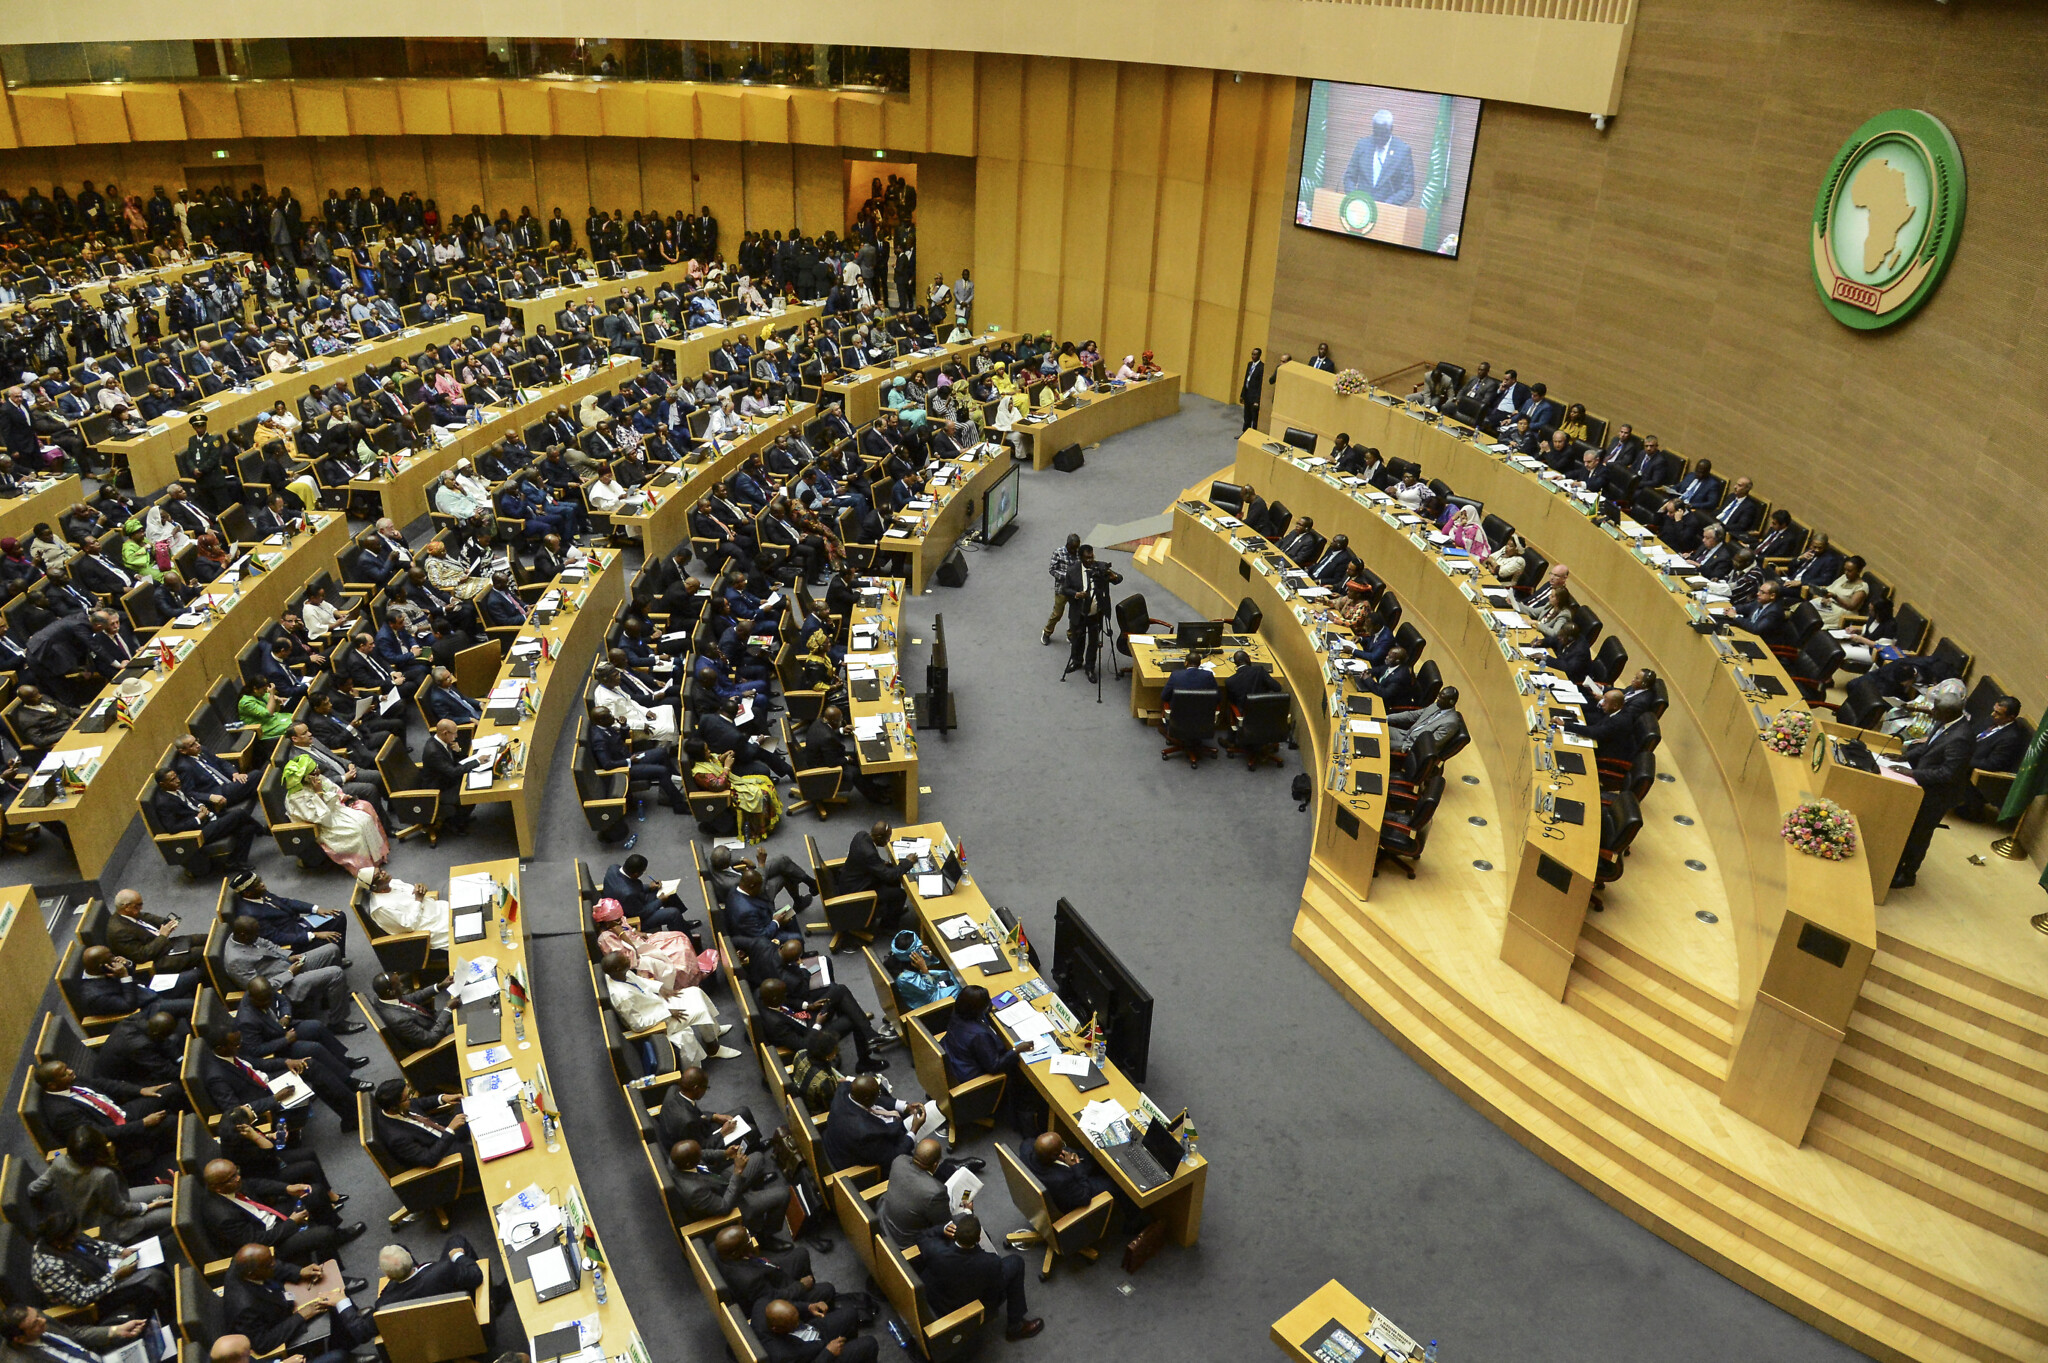 Israel to join African Union as observer after being kept out for 2